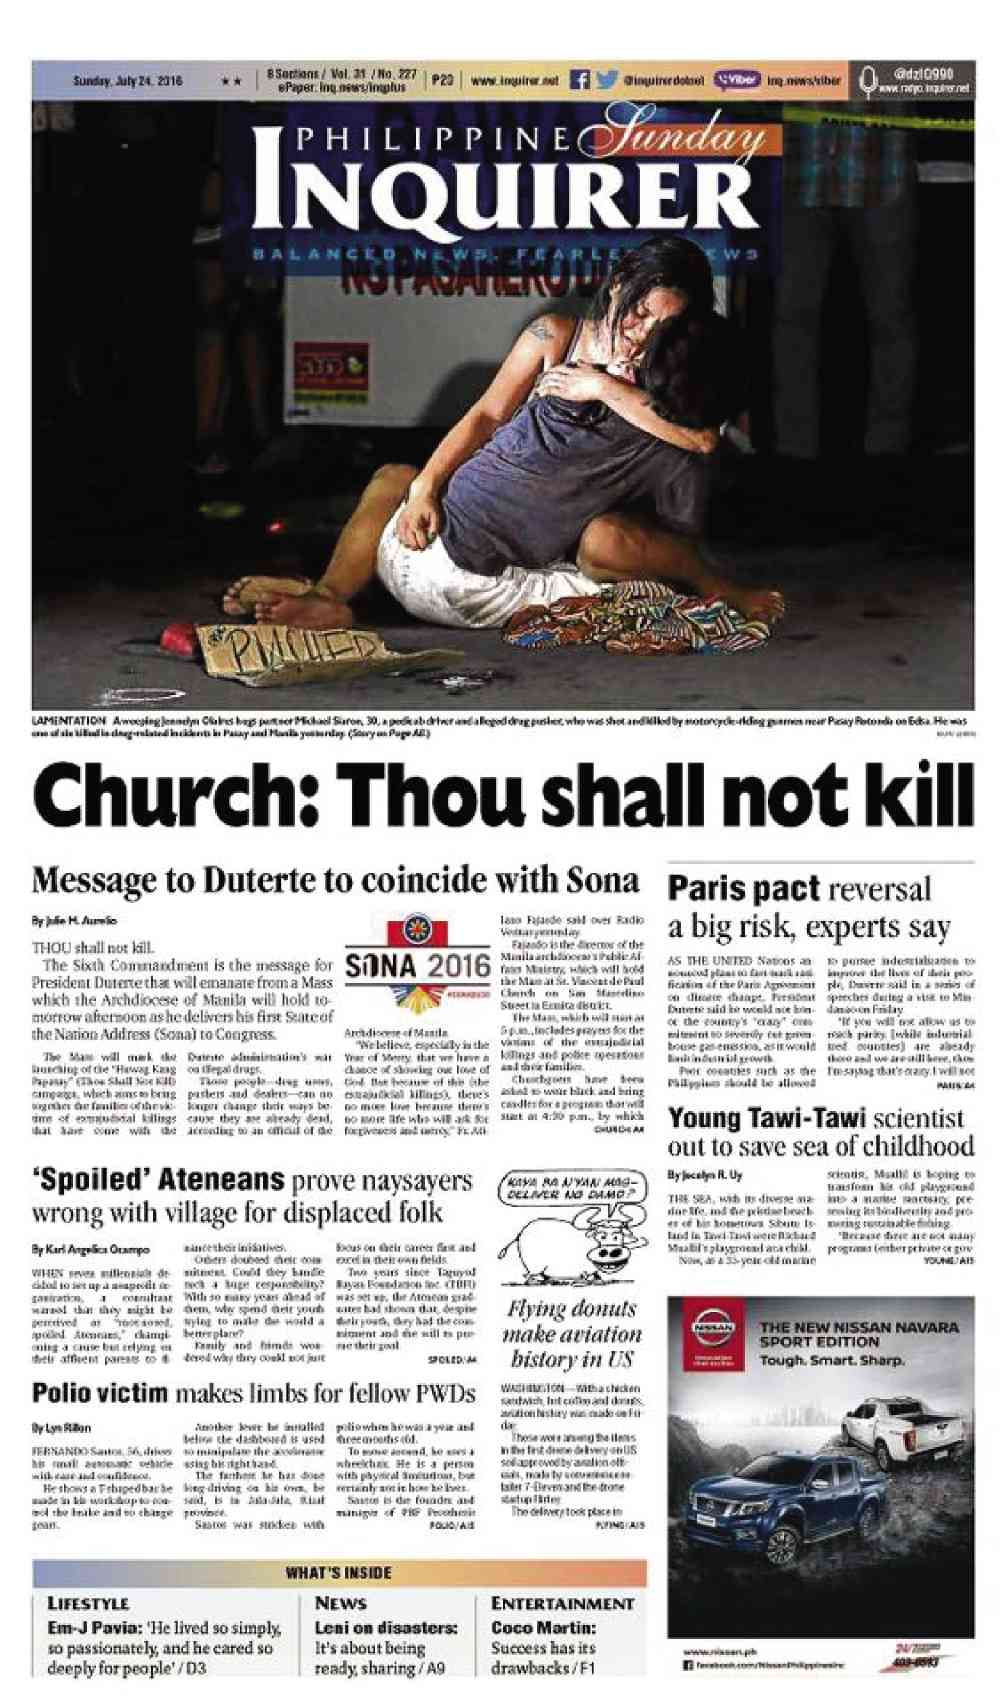 INQUIRER front-page photo last Sunday, July 24, that went viral, taken by Lerma while roving on the night shift